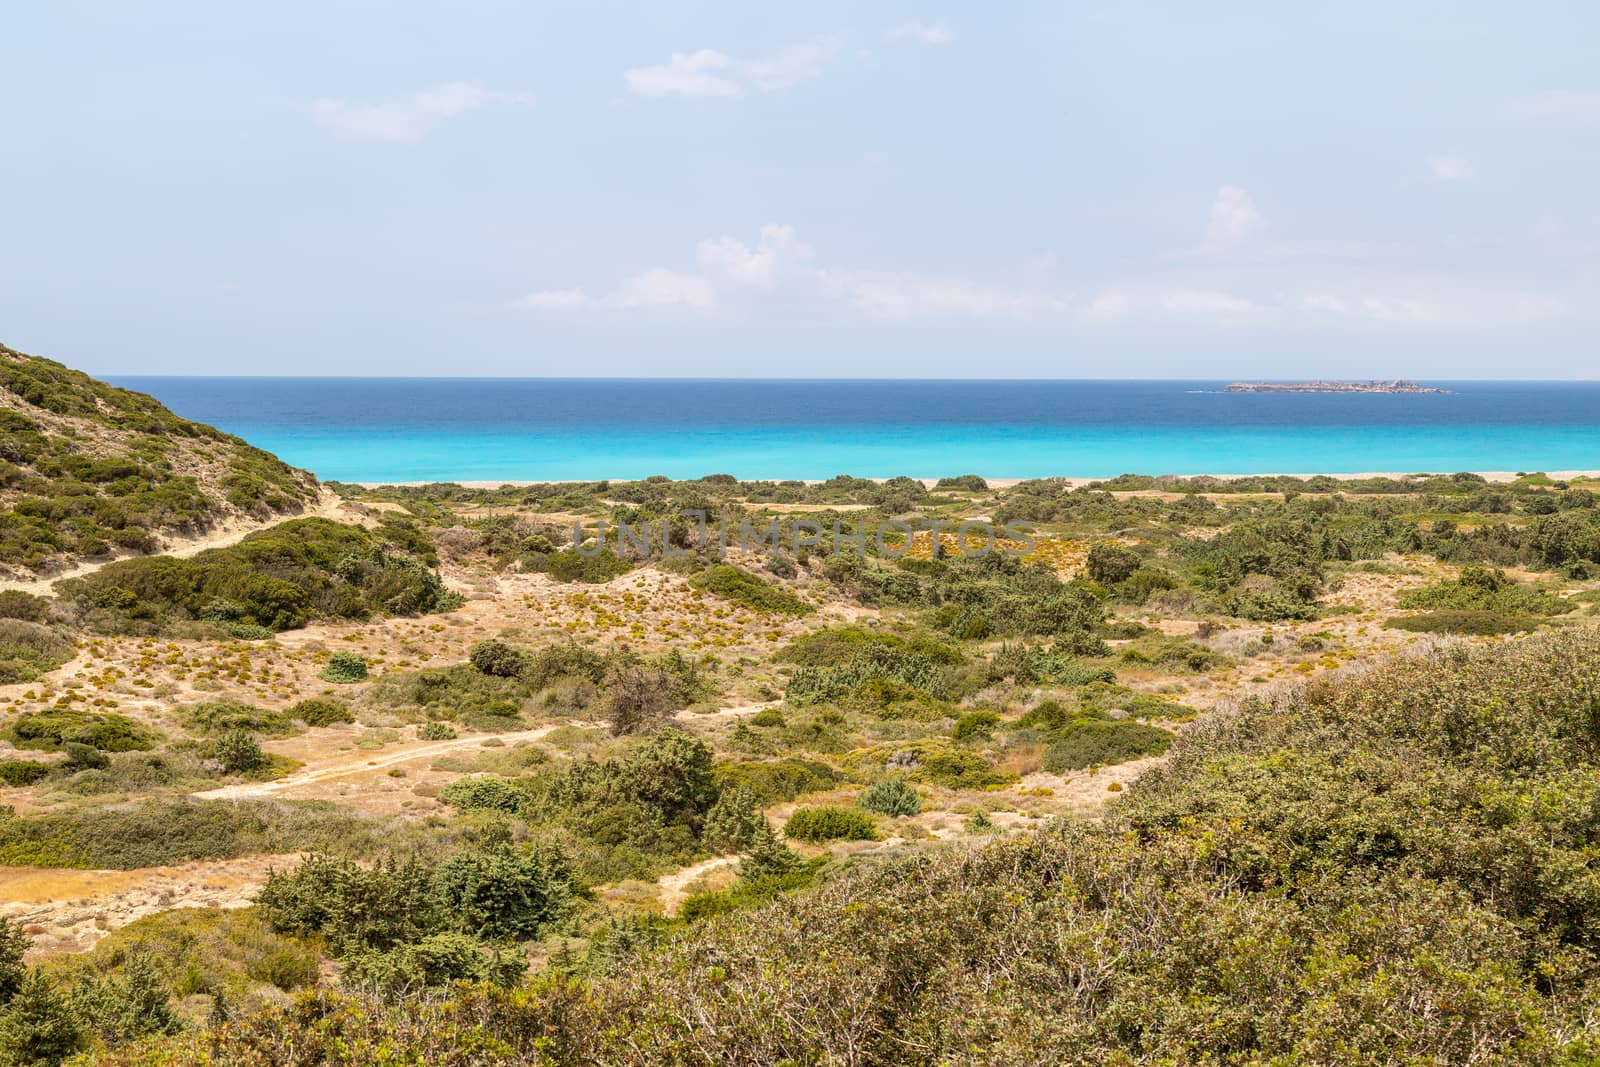 Landscape on the west coast of Rhodes island, Greece near Kattavia with green vegetation in the foreground and turqouise water in the background on a sunny day